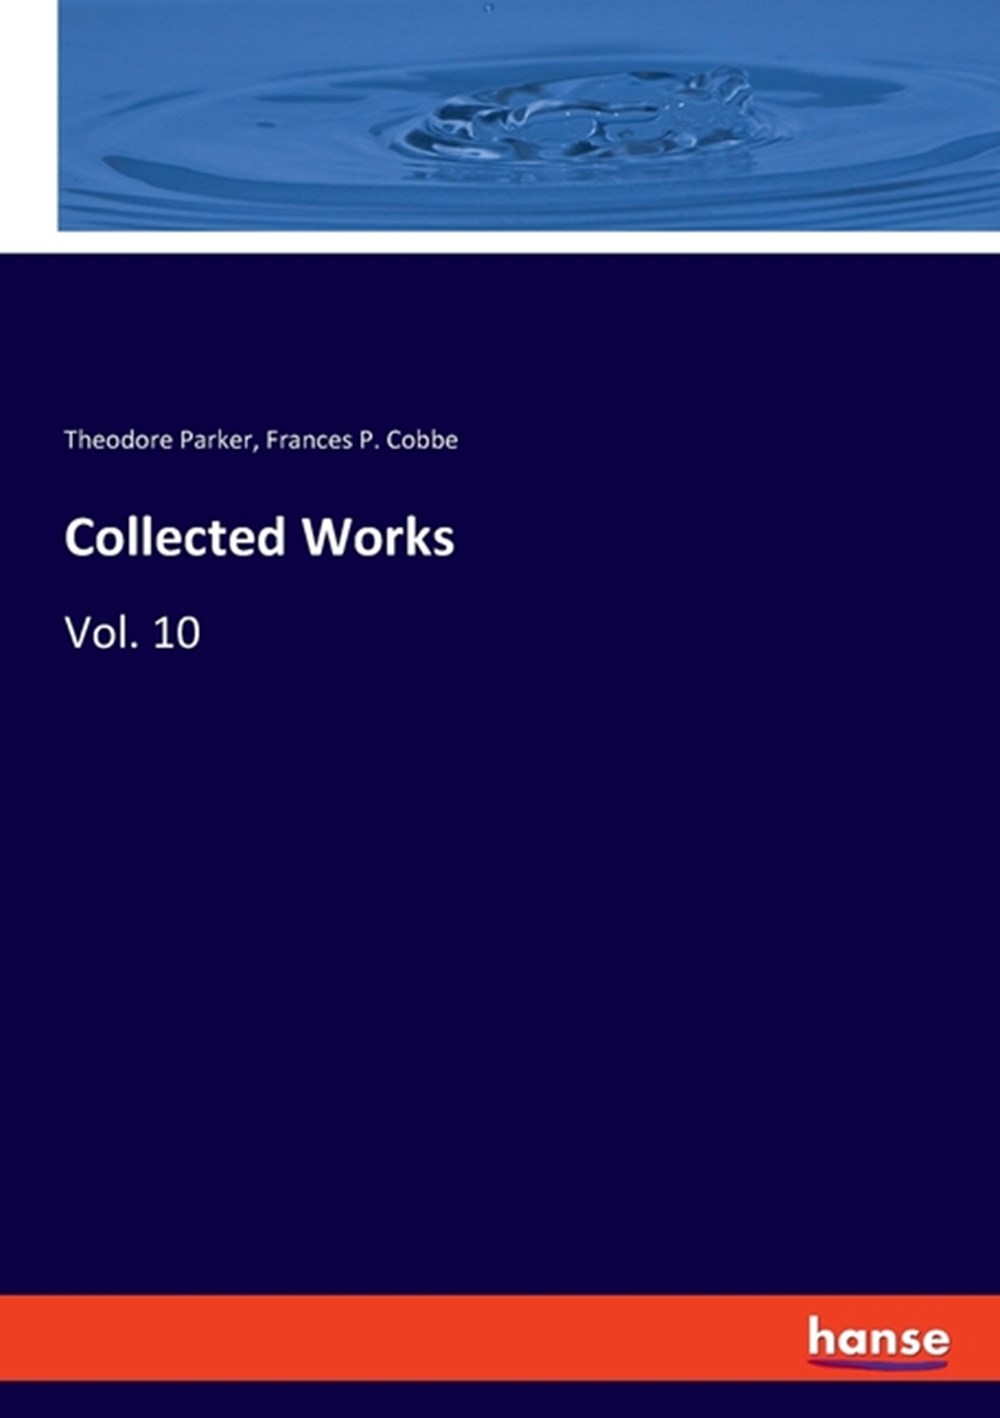 Collected Works Vol. 10